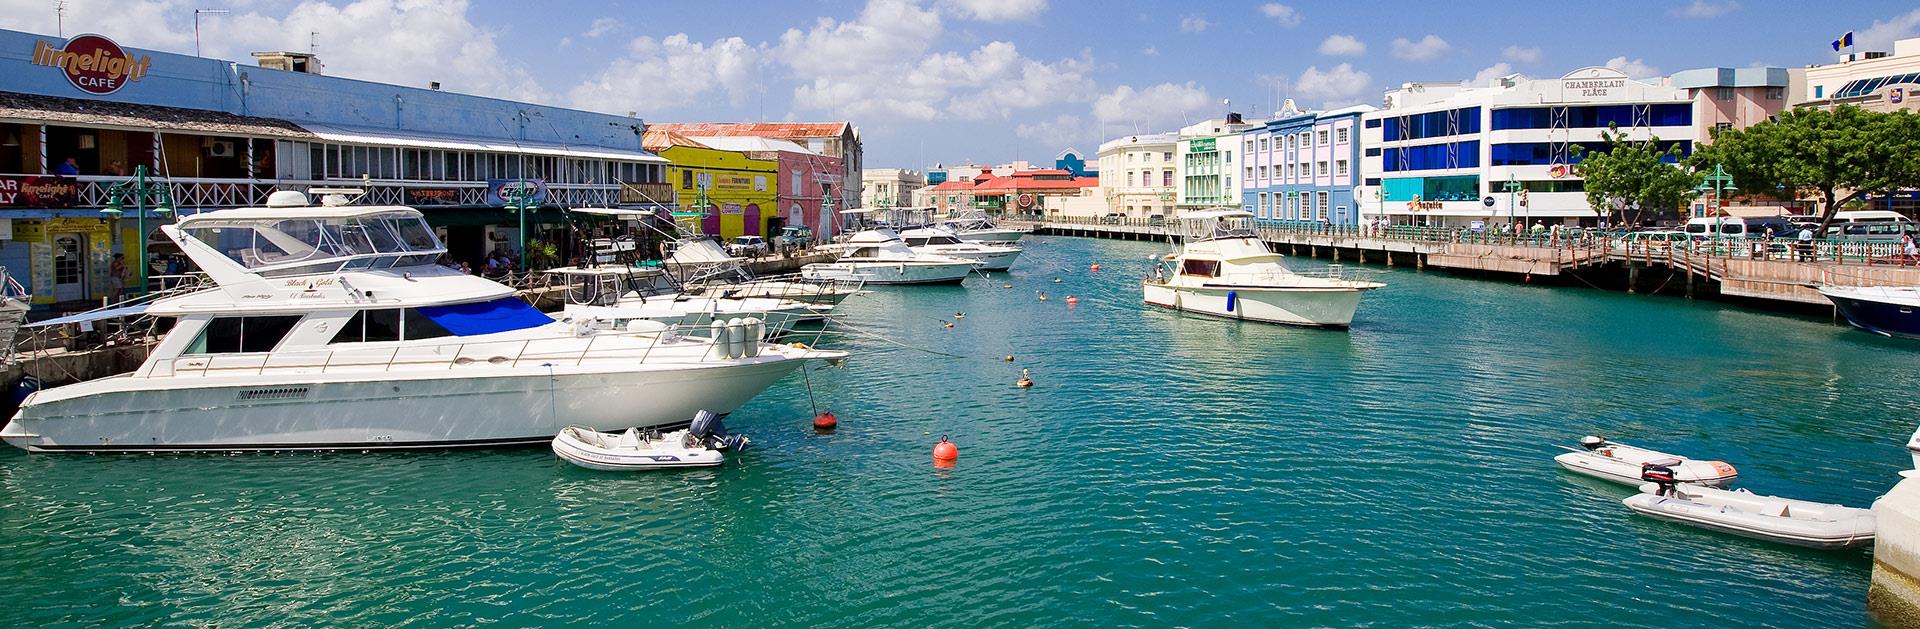 Bridgetown Capital City Of Barbados Things To Do And See